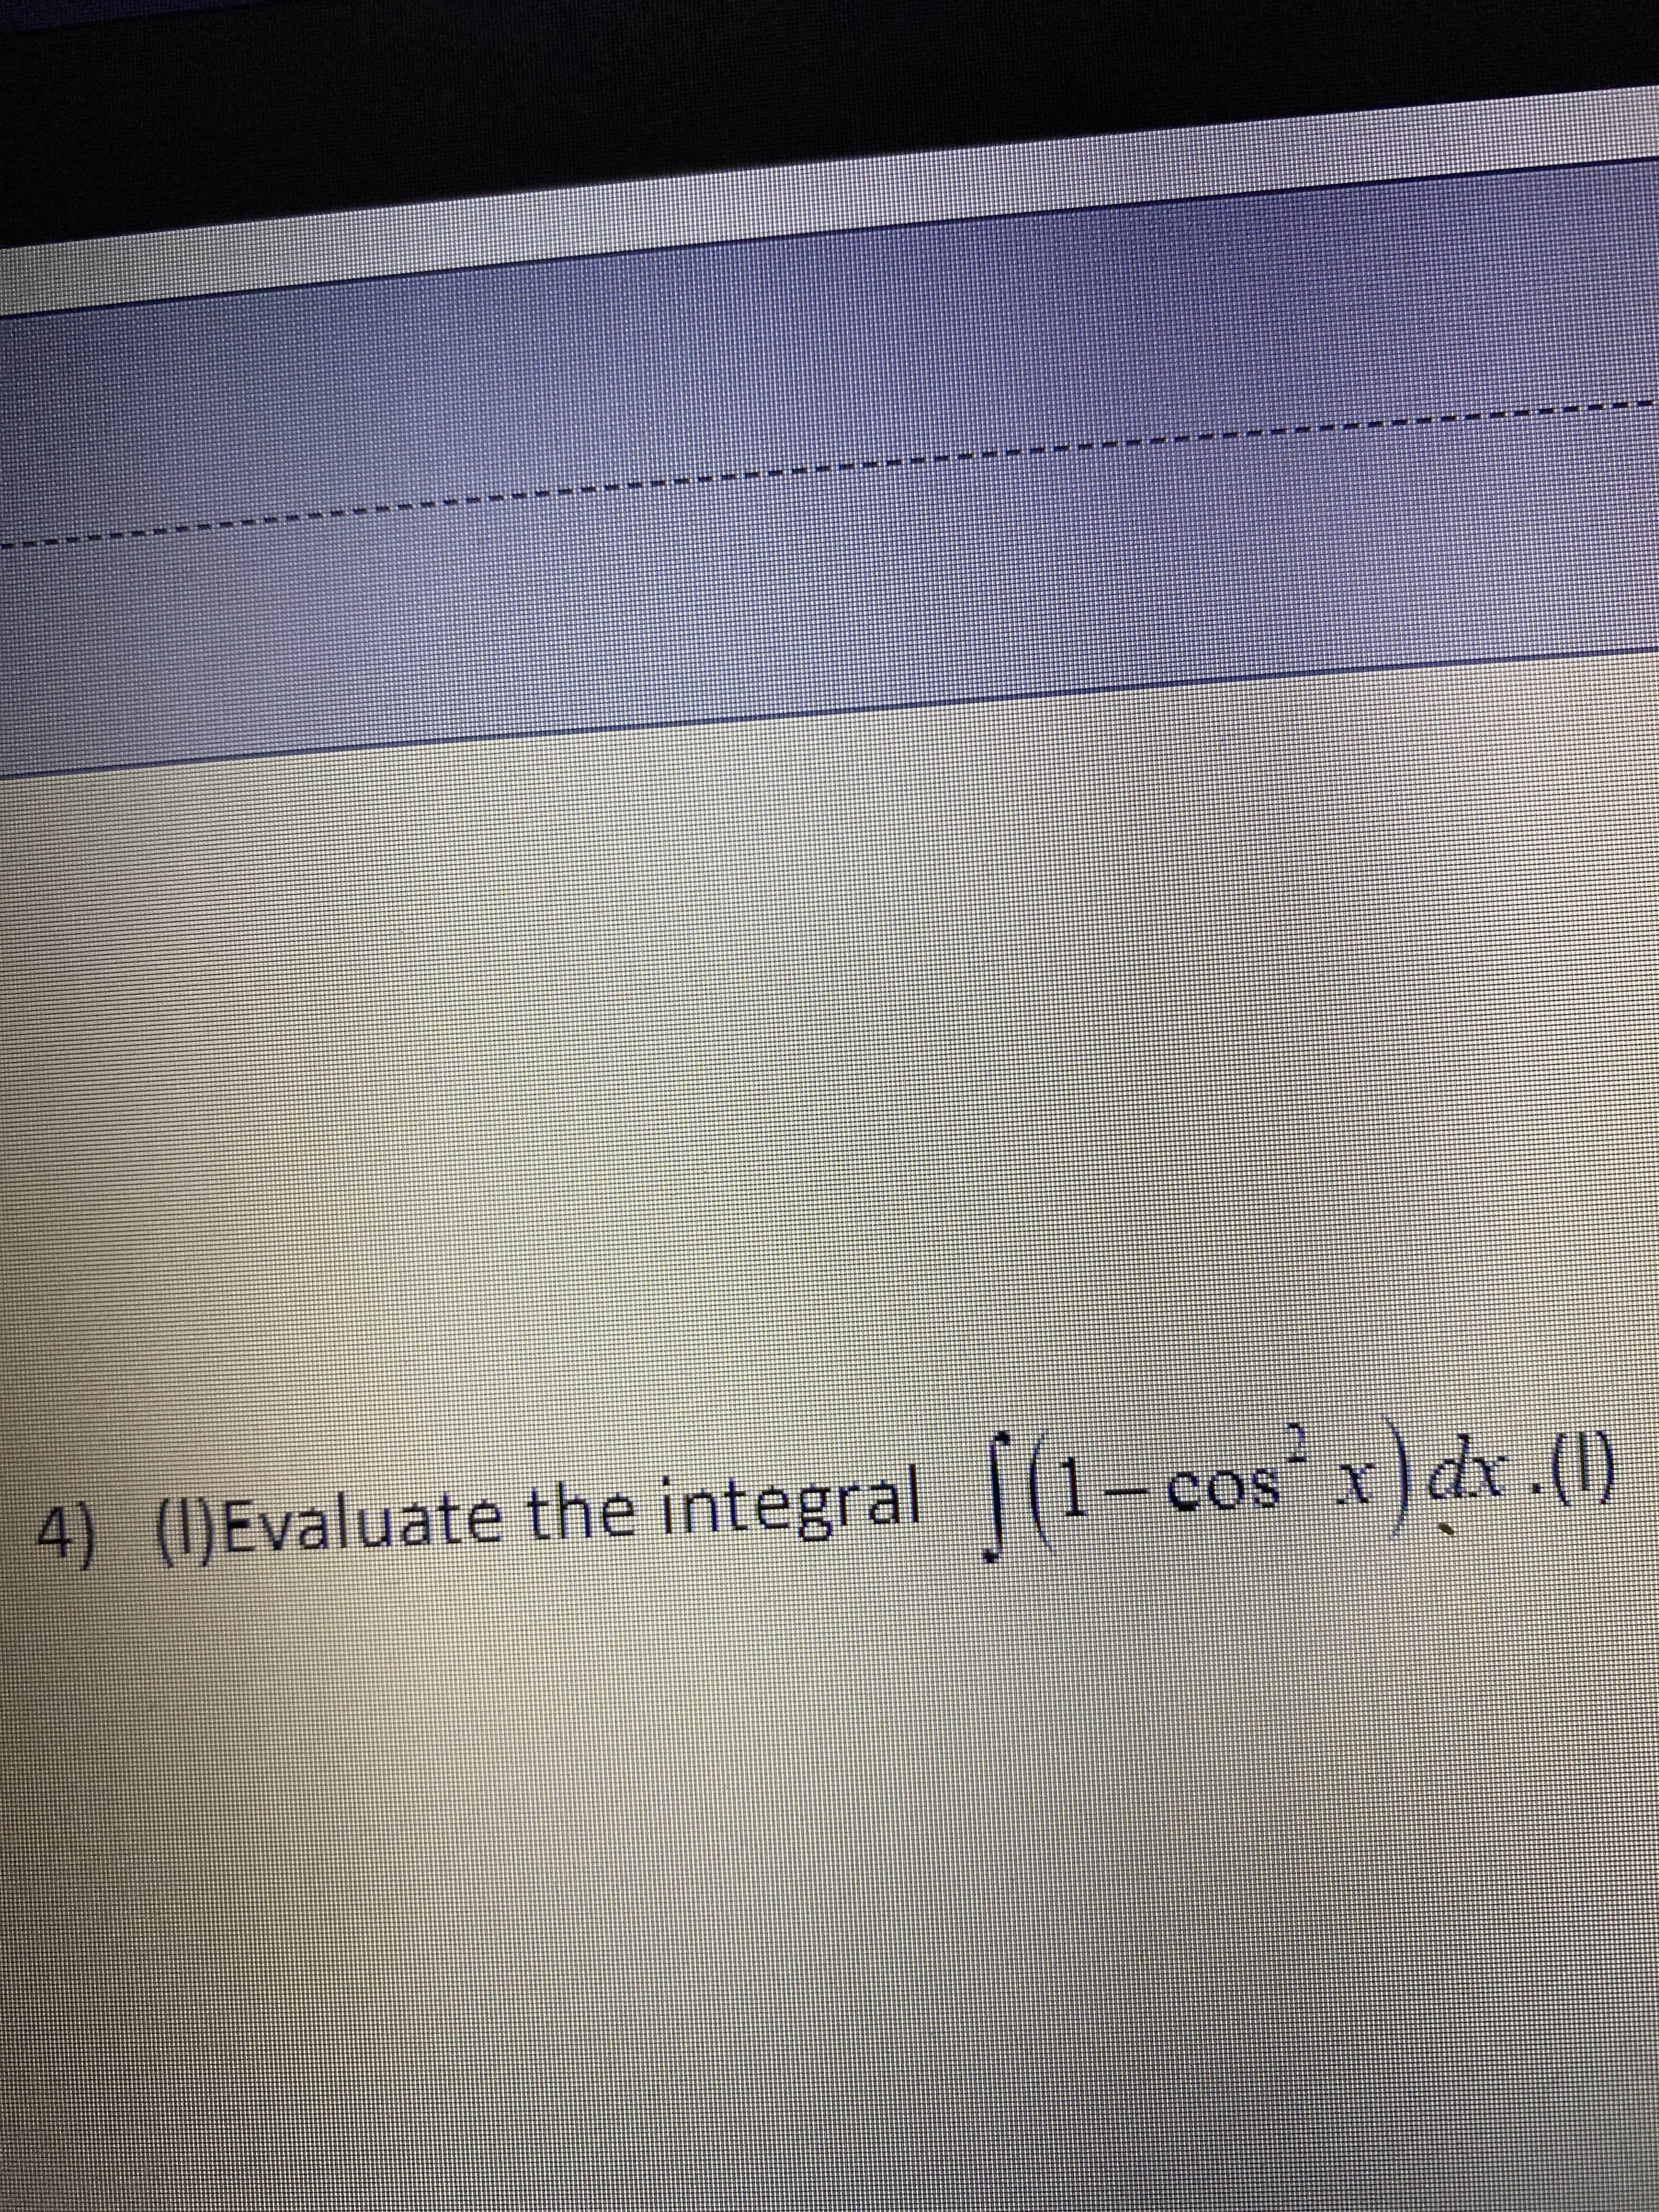 4) (I)Evaluate the integral (1-cos x) dx .(1)
X SO
